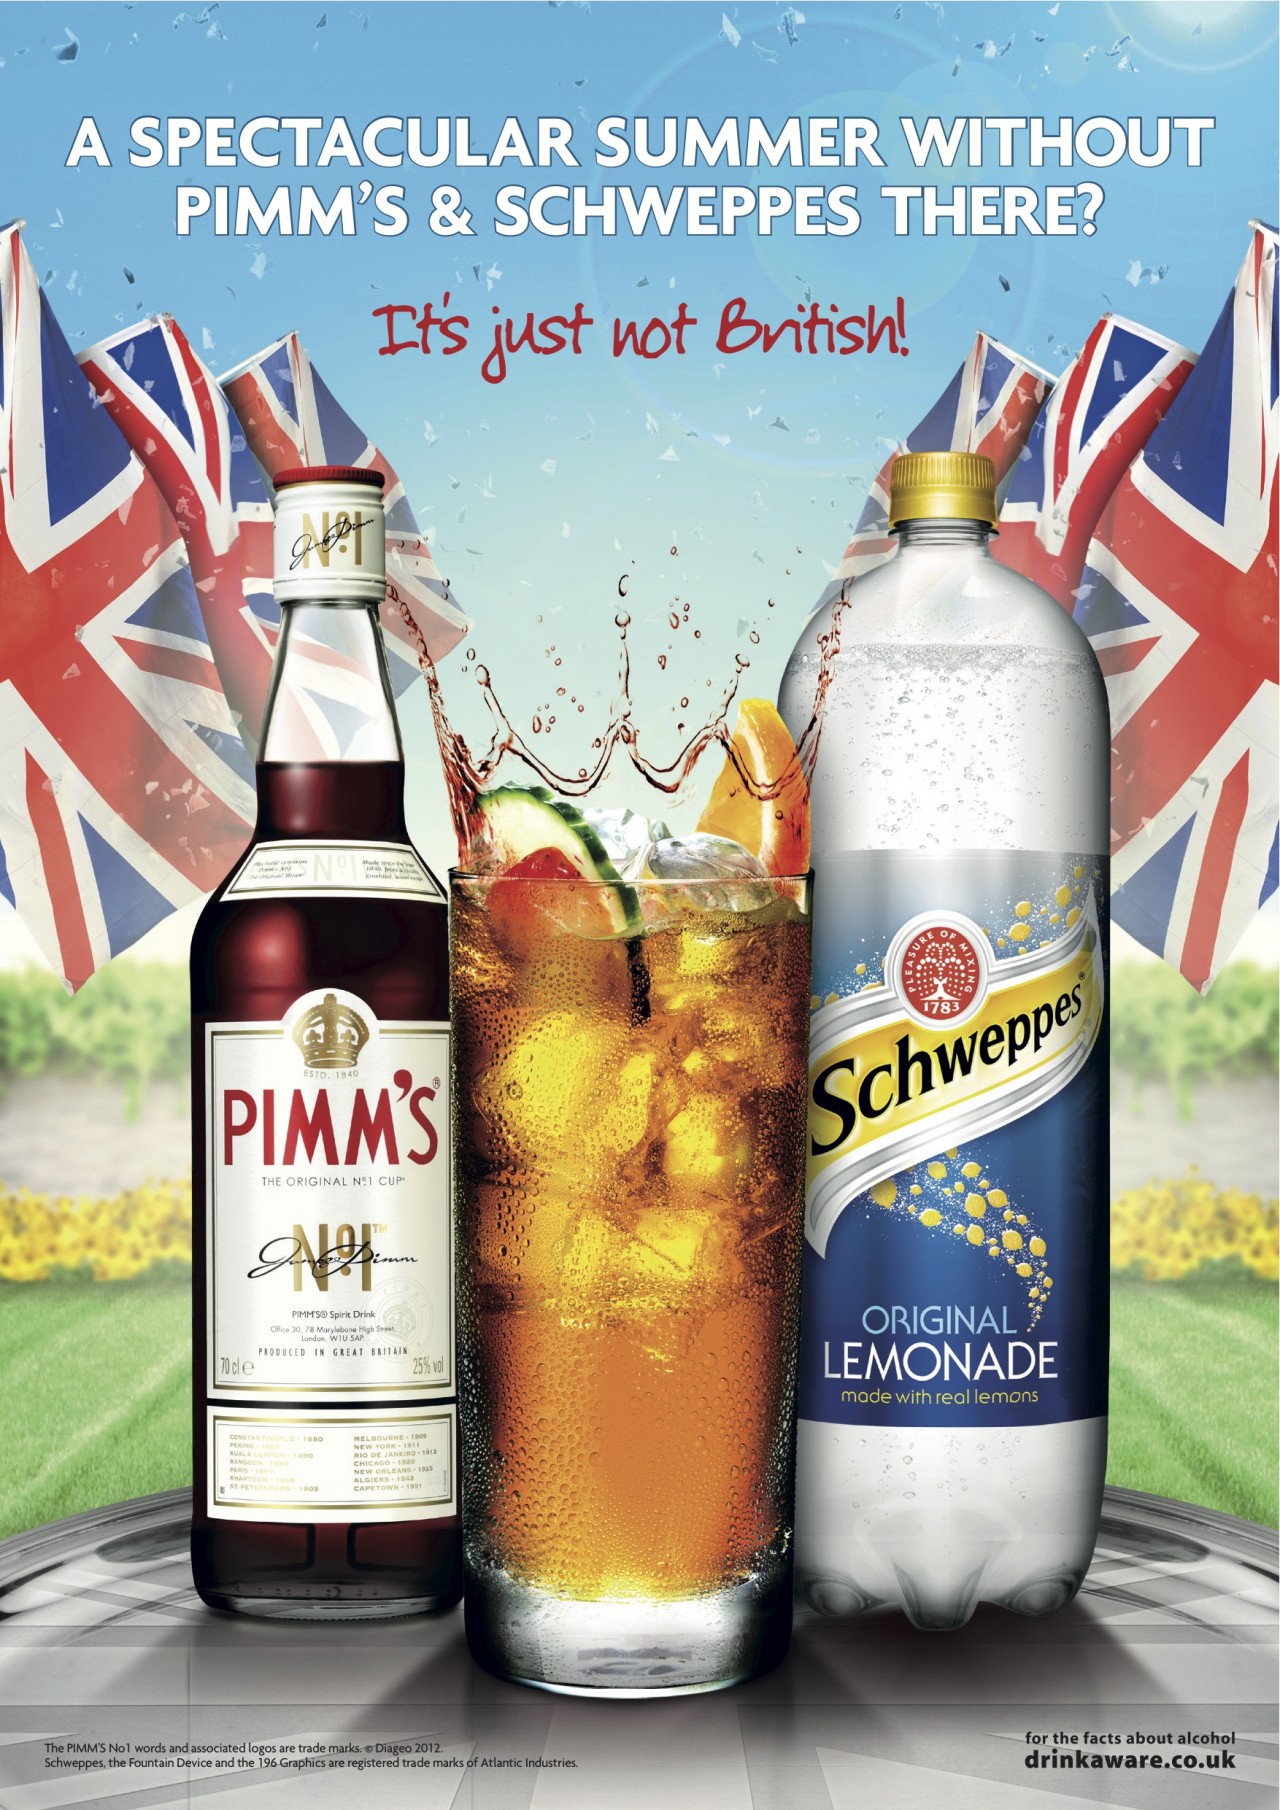 Pimms: the taste of summer advertisement poster.